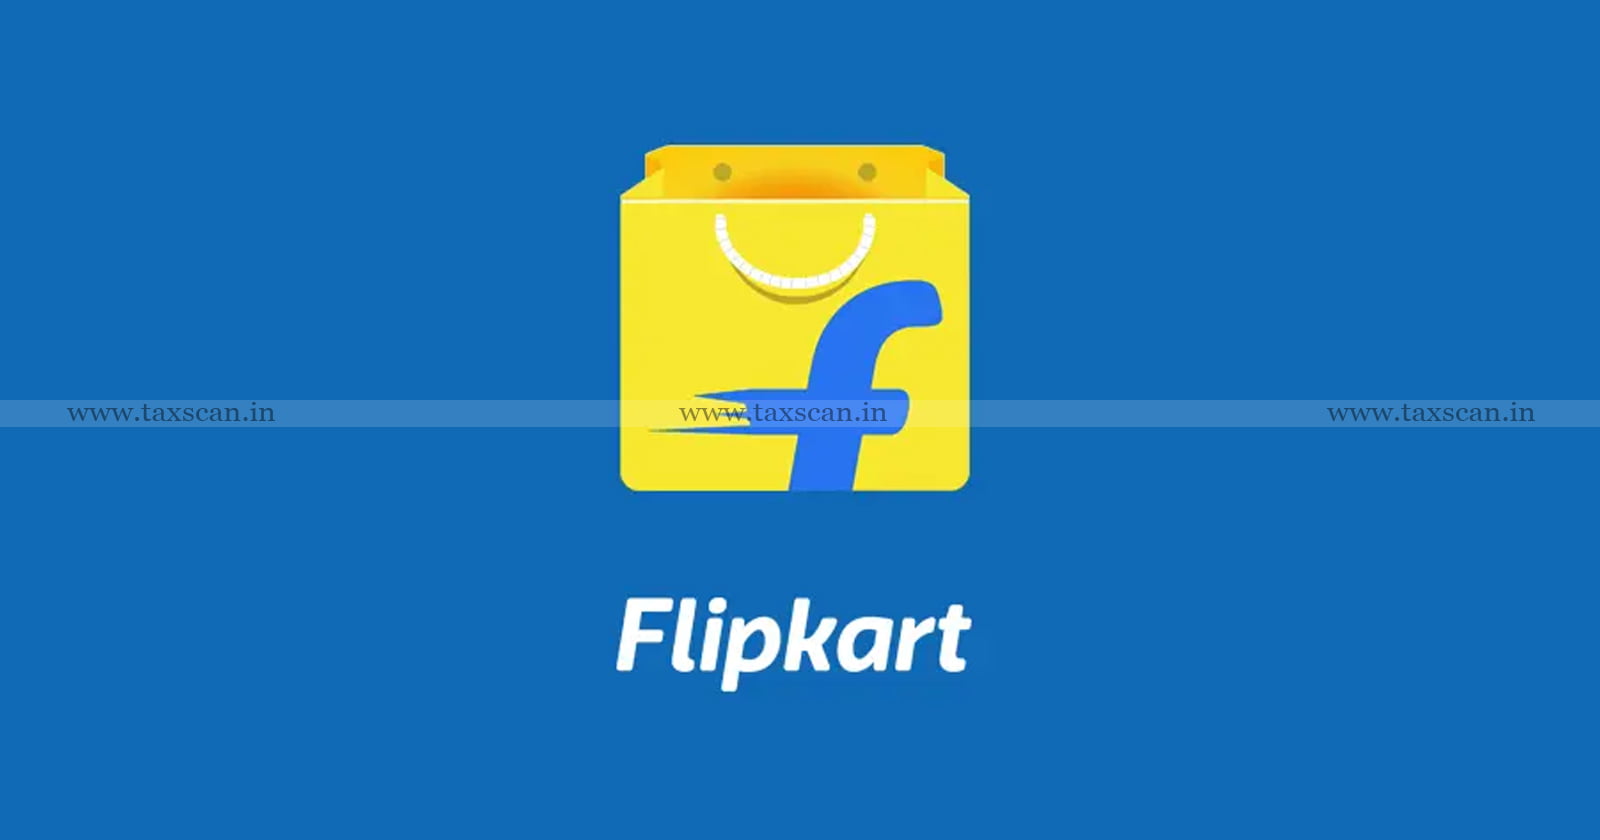 Flipkart - ESOP - Deduction - Income Tax Act - Income Tax - Tax - ITAT - Expenditure incurred - taxscan